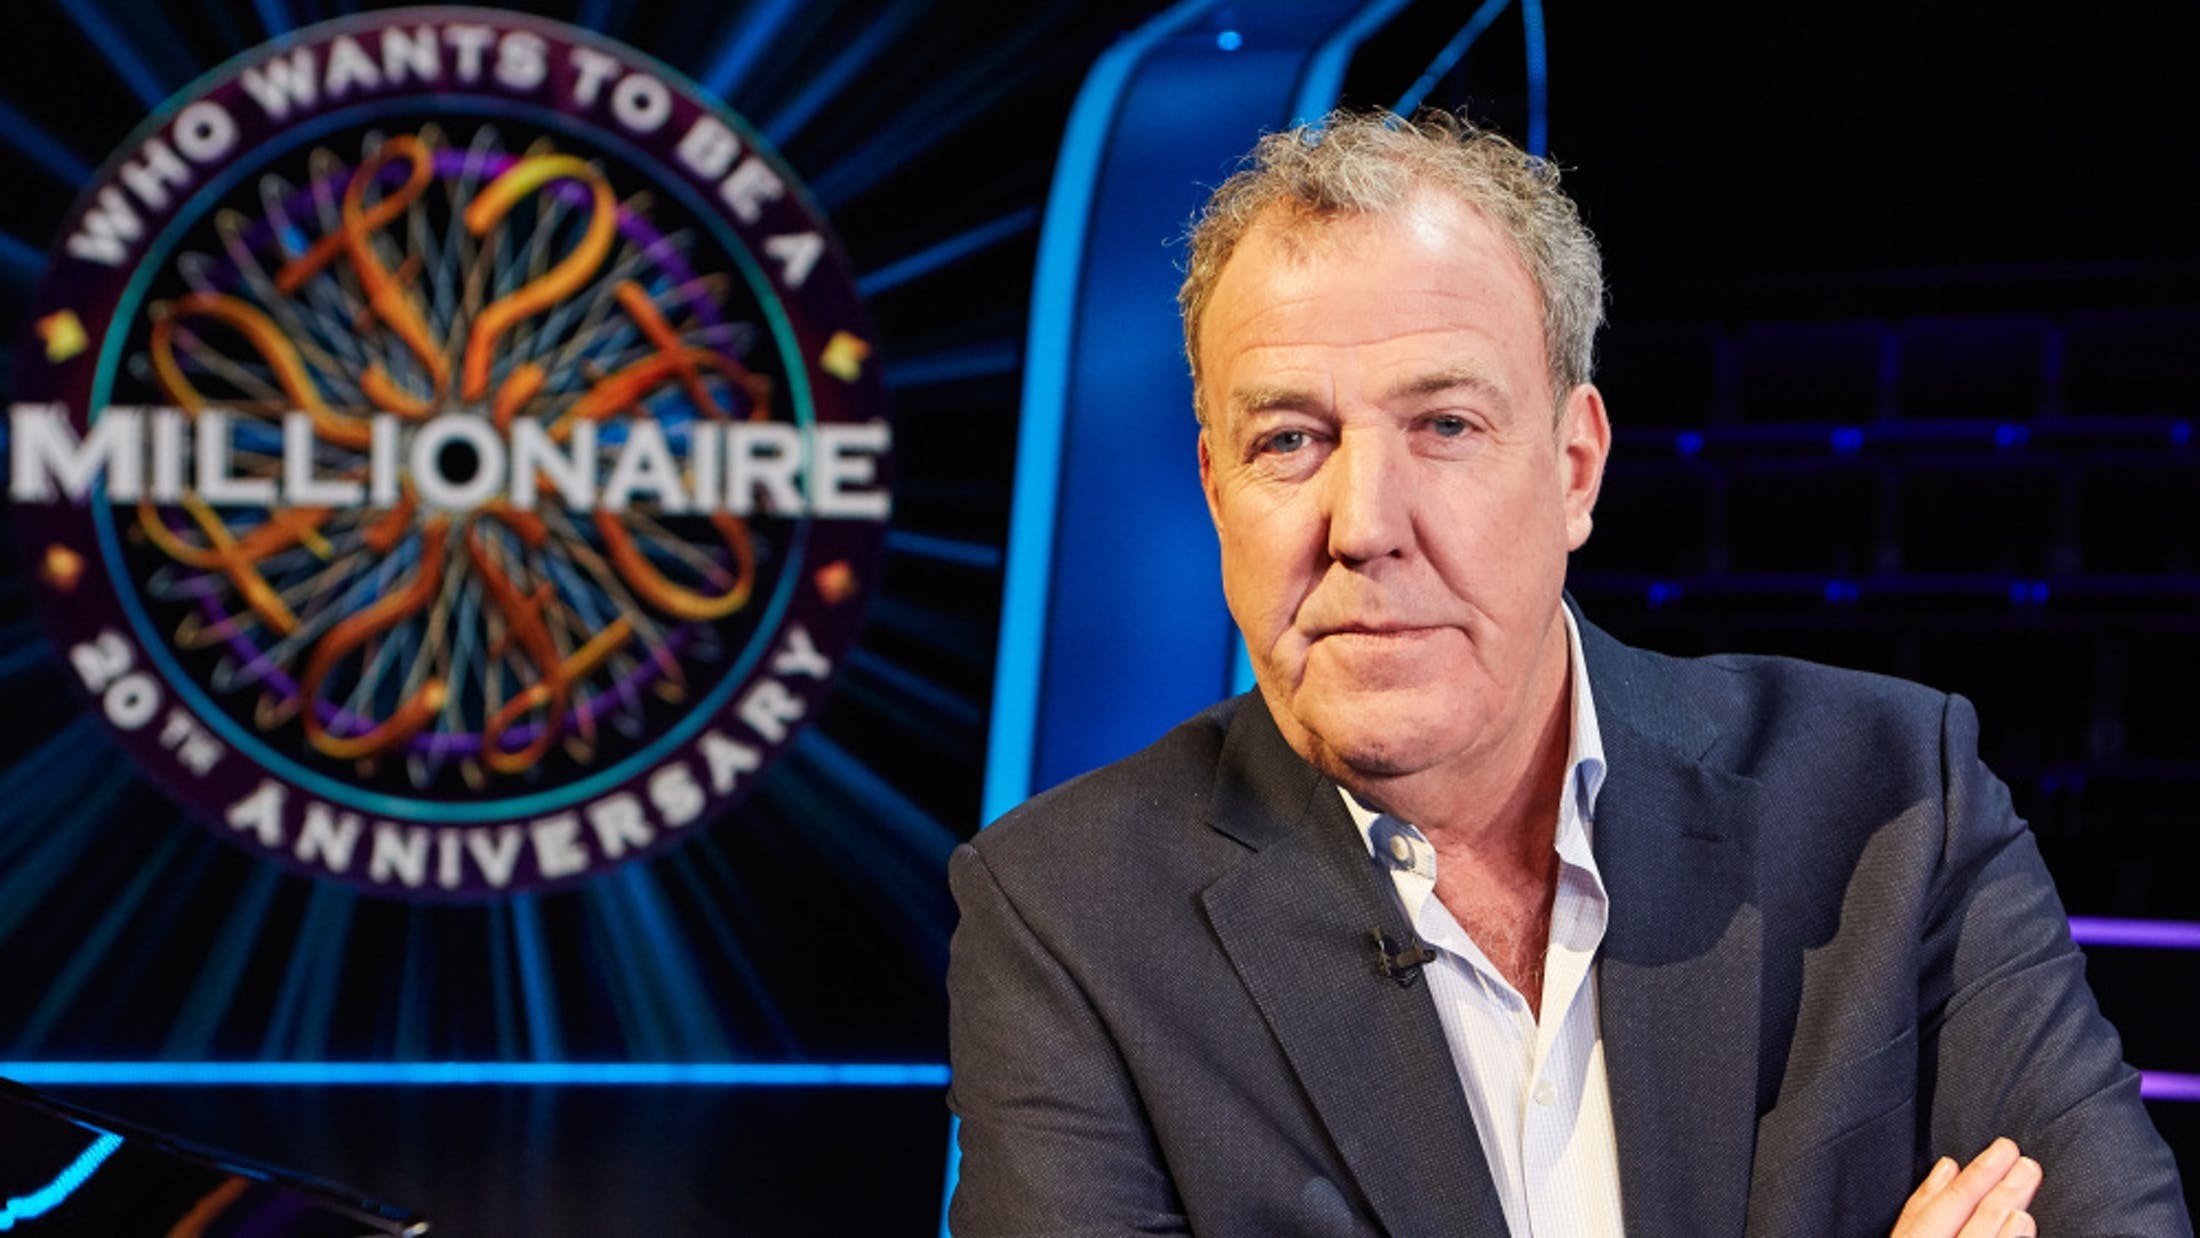 Jeremy Clarkson in Who Wants to be a Millionaire